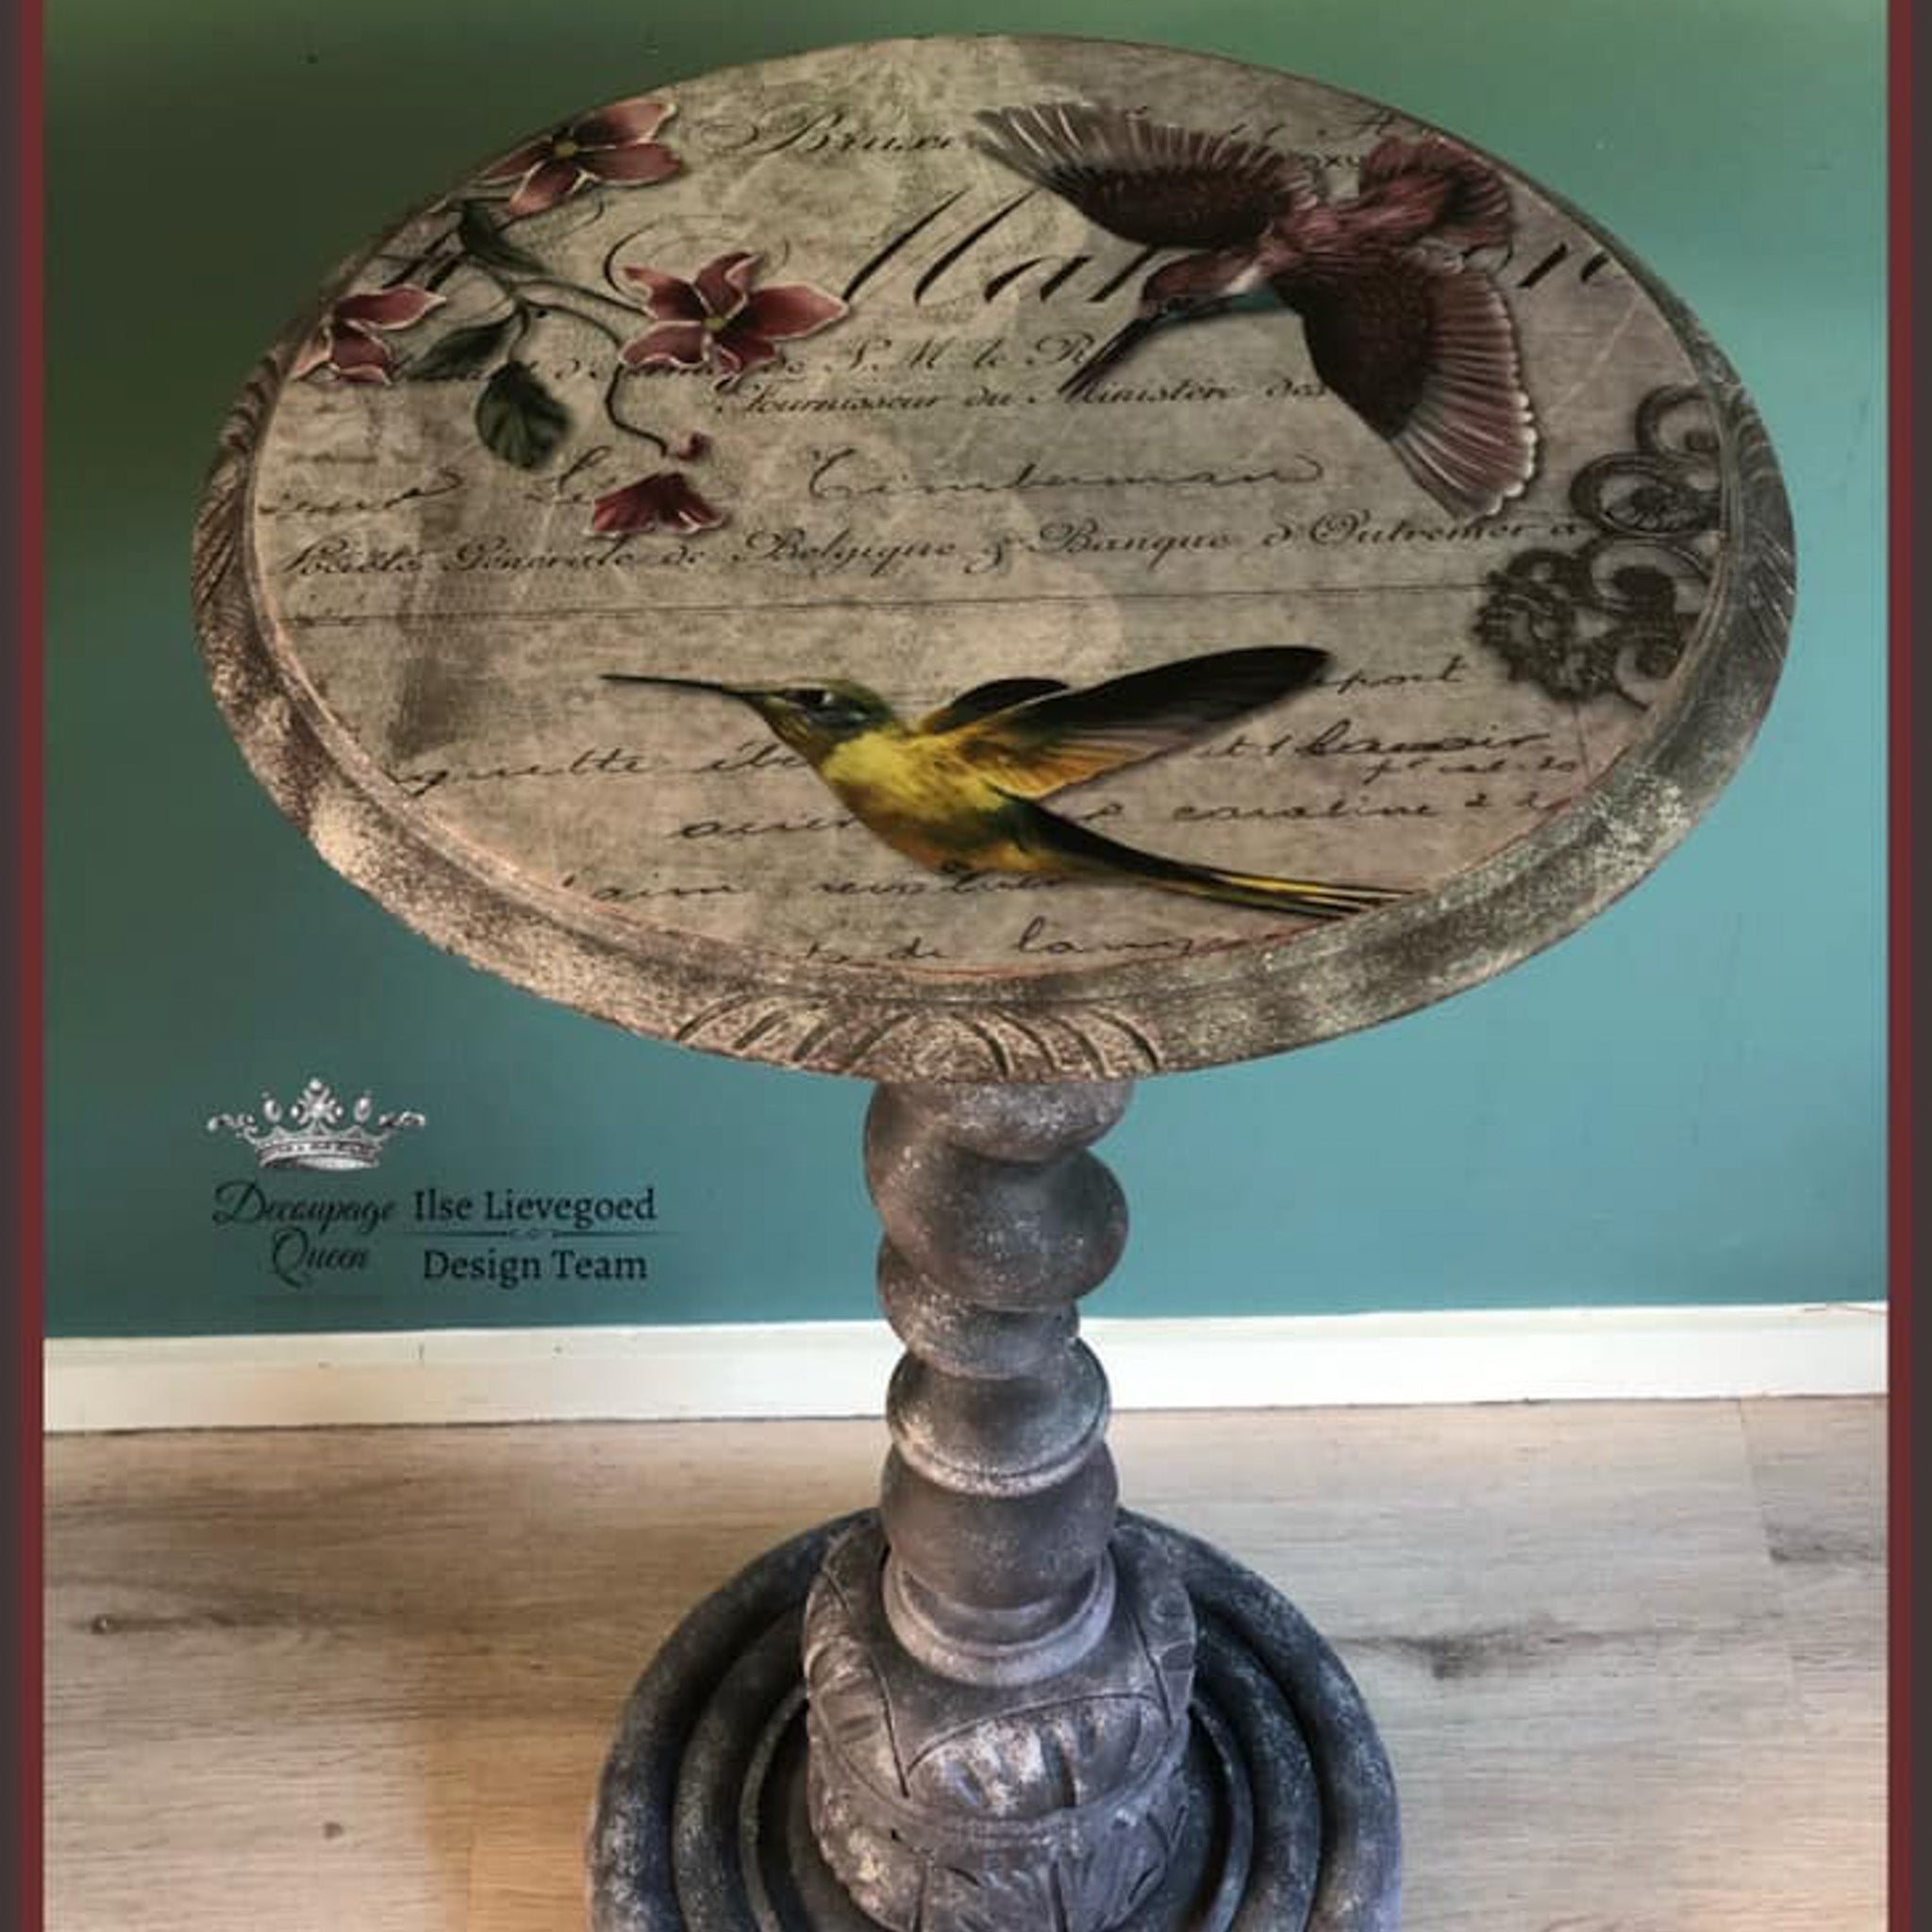 A small stone plant stand refurbished by Ilse Lievegoed Design Team features Decoupage Queen's Hummingbird Song rice decoupage paper on the top.